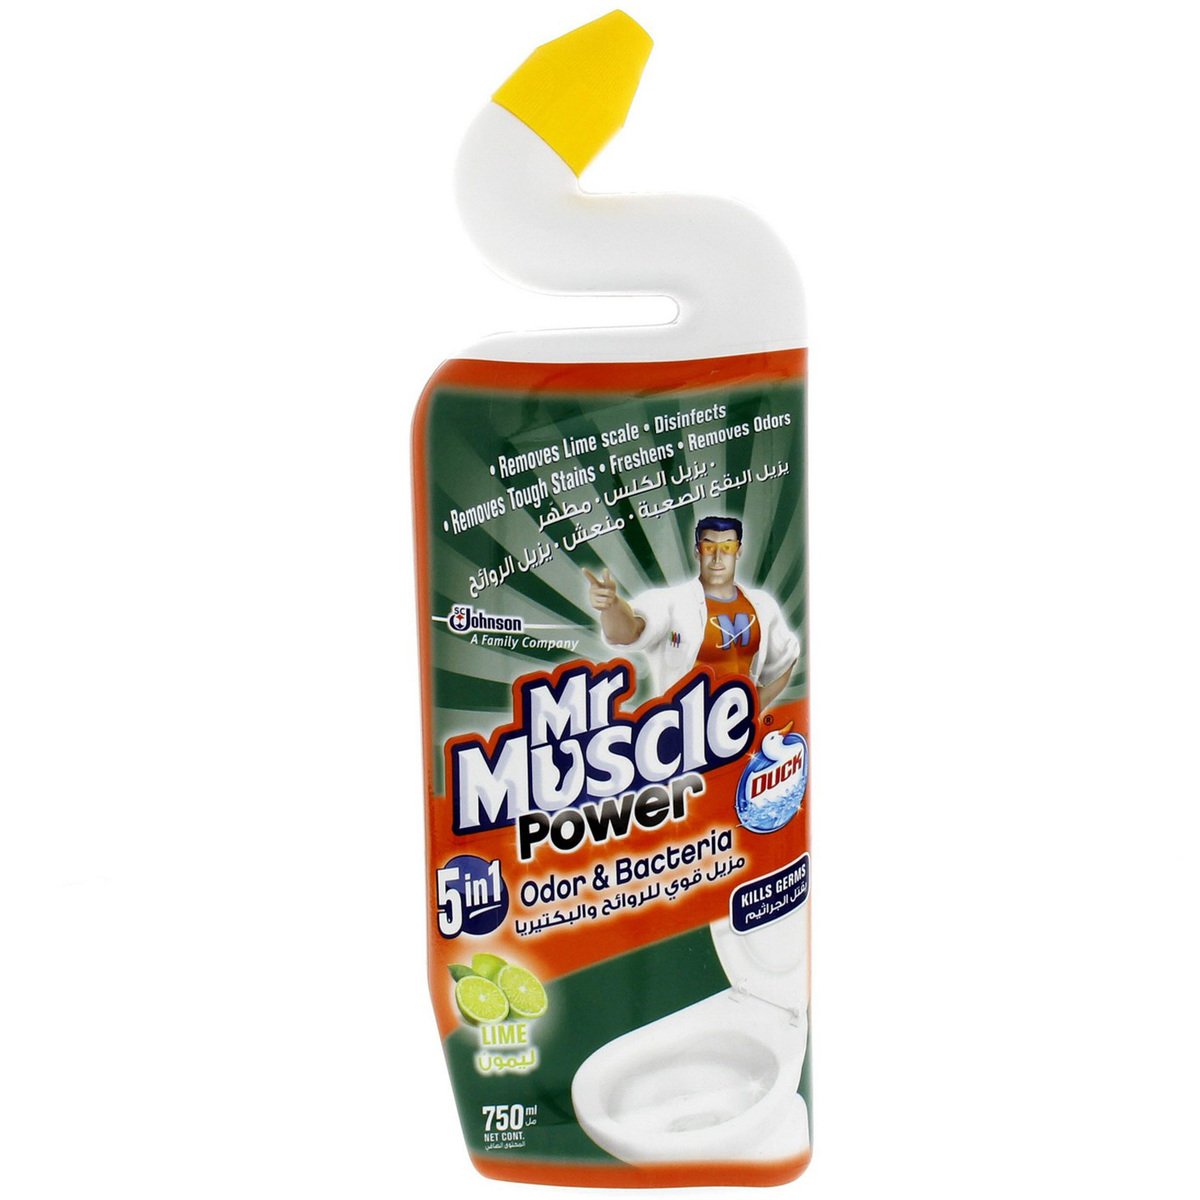 Mr Muscle Lime Power 5 In 1 750ml